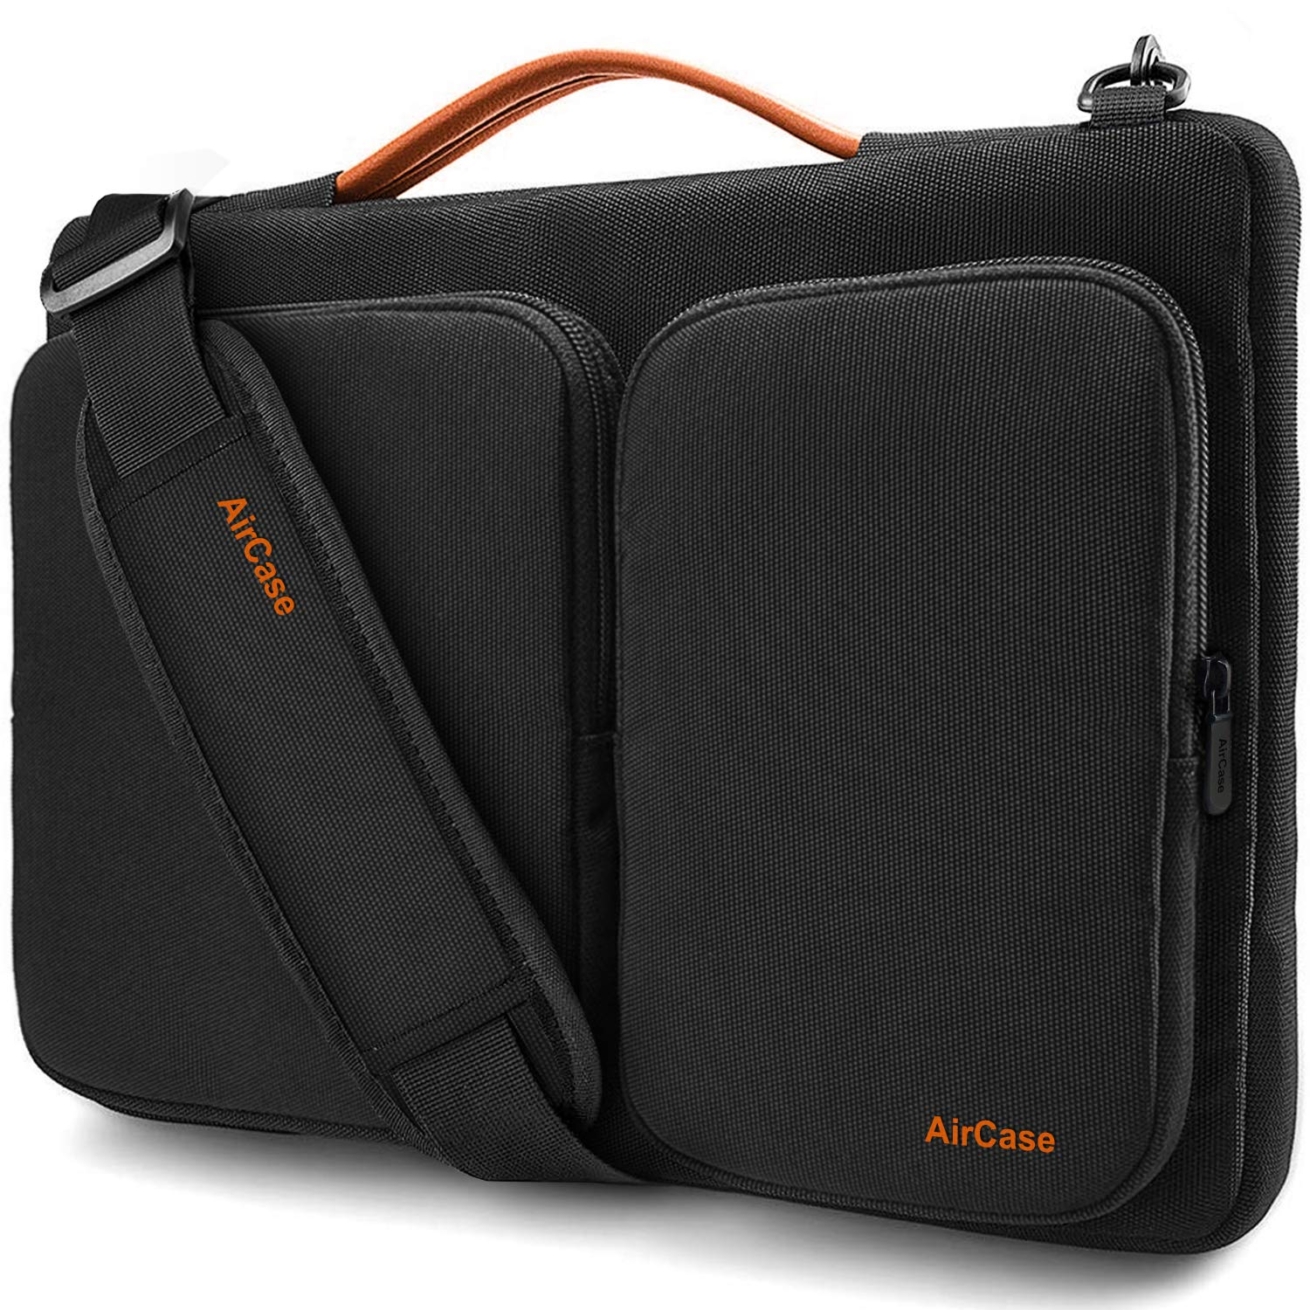 57% OFF on AirCase Laptop Bag Sleeve Case Cover Pouch for 13-Inch, 14-Inch  Laptop for Men & Women Neoprene(Black) on Amazon | PaisaWapas.com